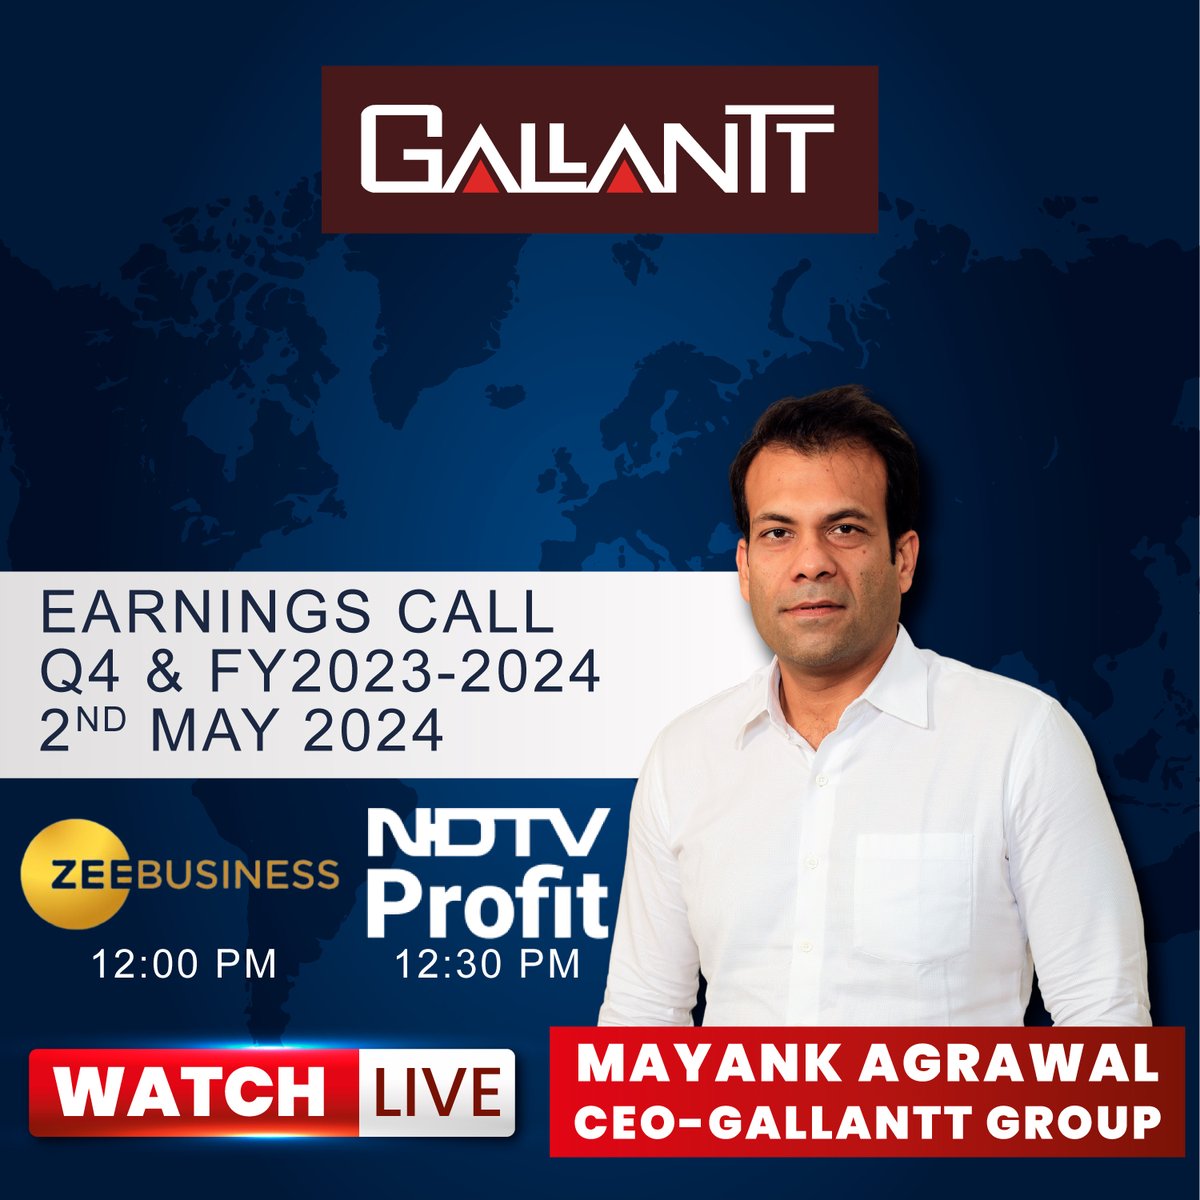 Tune in to Zee Business at 12:00 PM: zeebiz.com/live-tv and NDTV Profit at 12:30 PM: ndtvprofit.com/videos?src=top… to catch Gallantt Ispat's live earnings call for Q4 and FY 2023-24, featuring our CEO Mr. Mayank Agarwal on 2nd May 2024. #GallanttGroup #ZeeBusiness #NDTVProfit